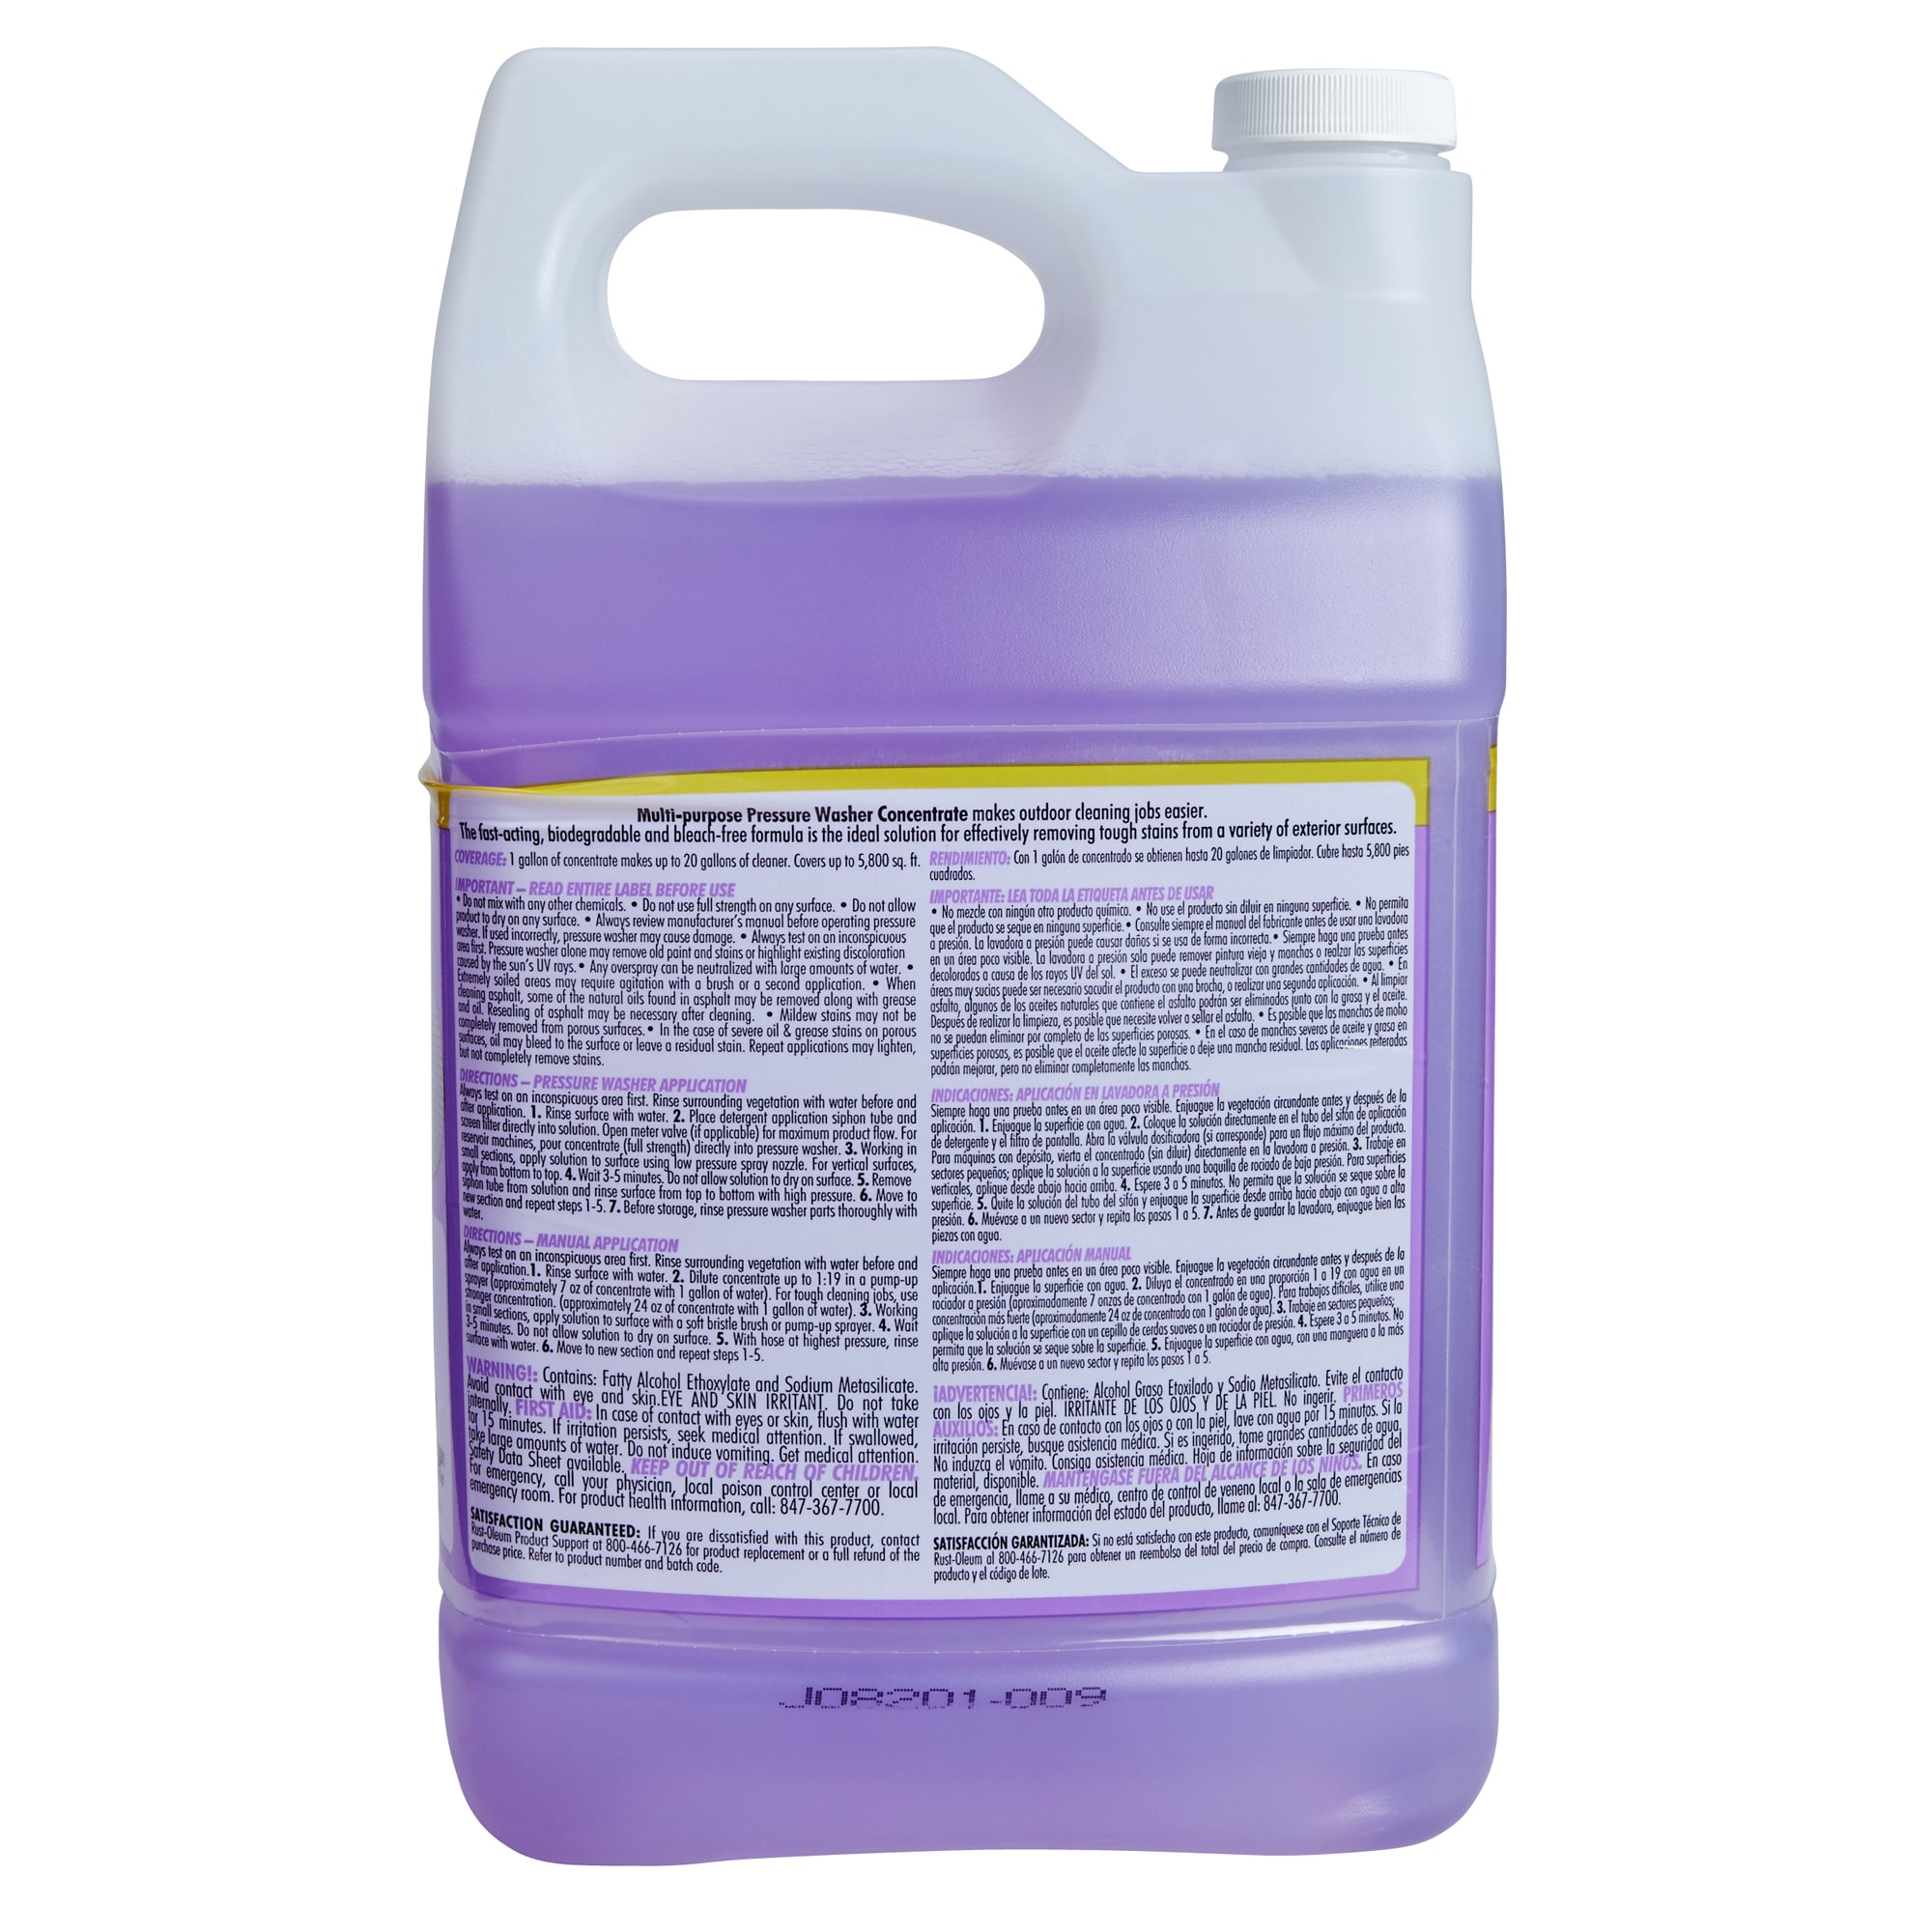 ZEP 172 oz. Purple Pressure Wash Outdoor Cleaner R45806 - The Home Depot